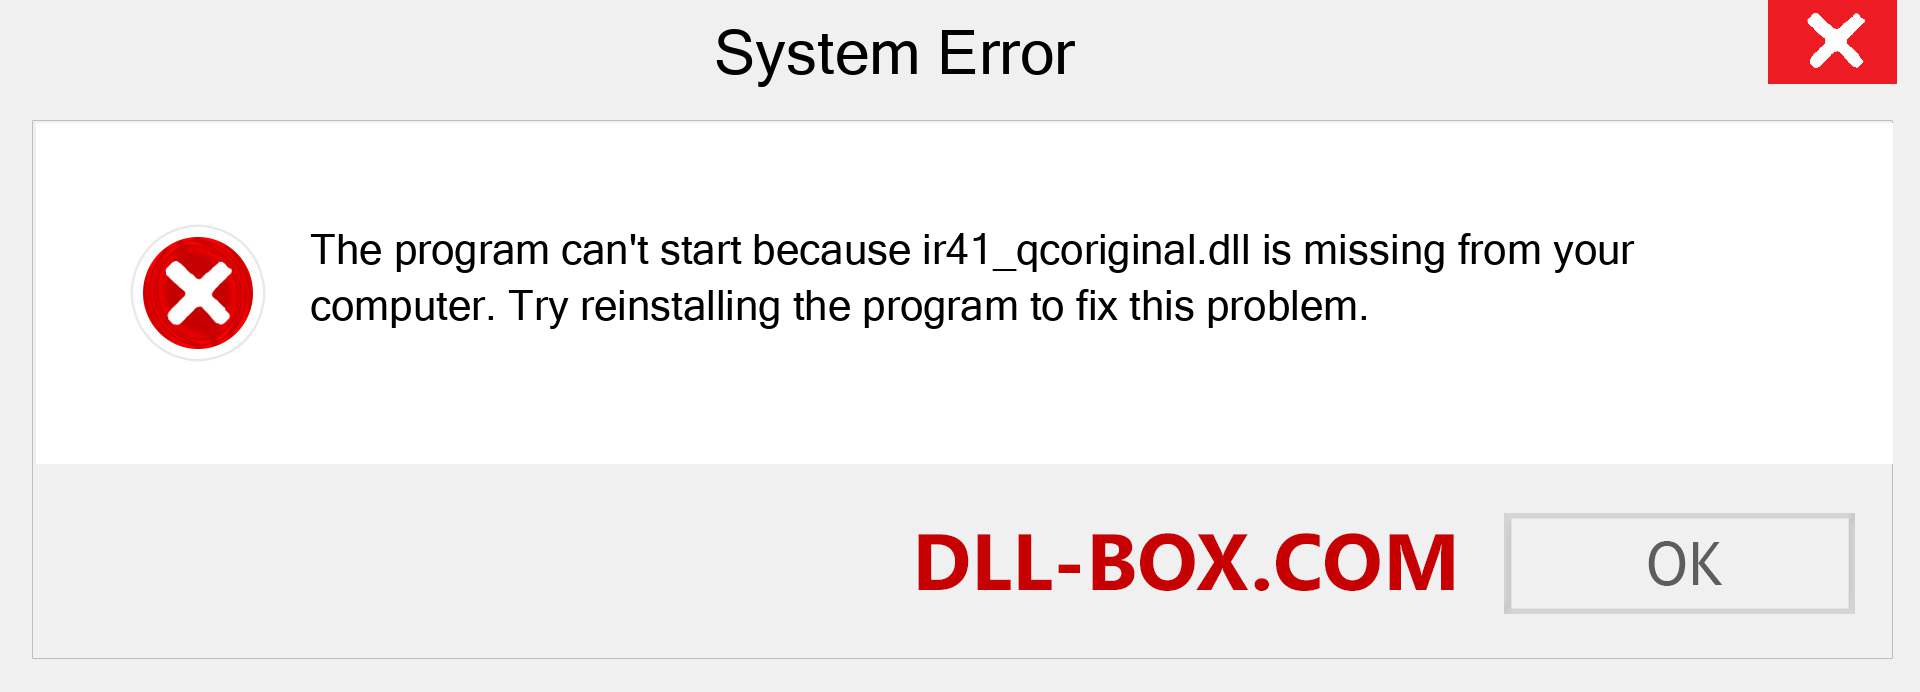  ir41_qcoriginal.dll file is missing?. Download for Windows 7, 8, 10 - Fix  ir41_qcoriginal dll Missing Error on Windows, photos, images